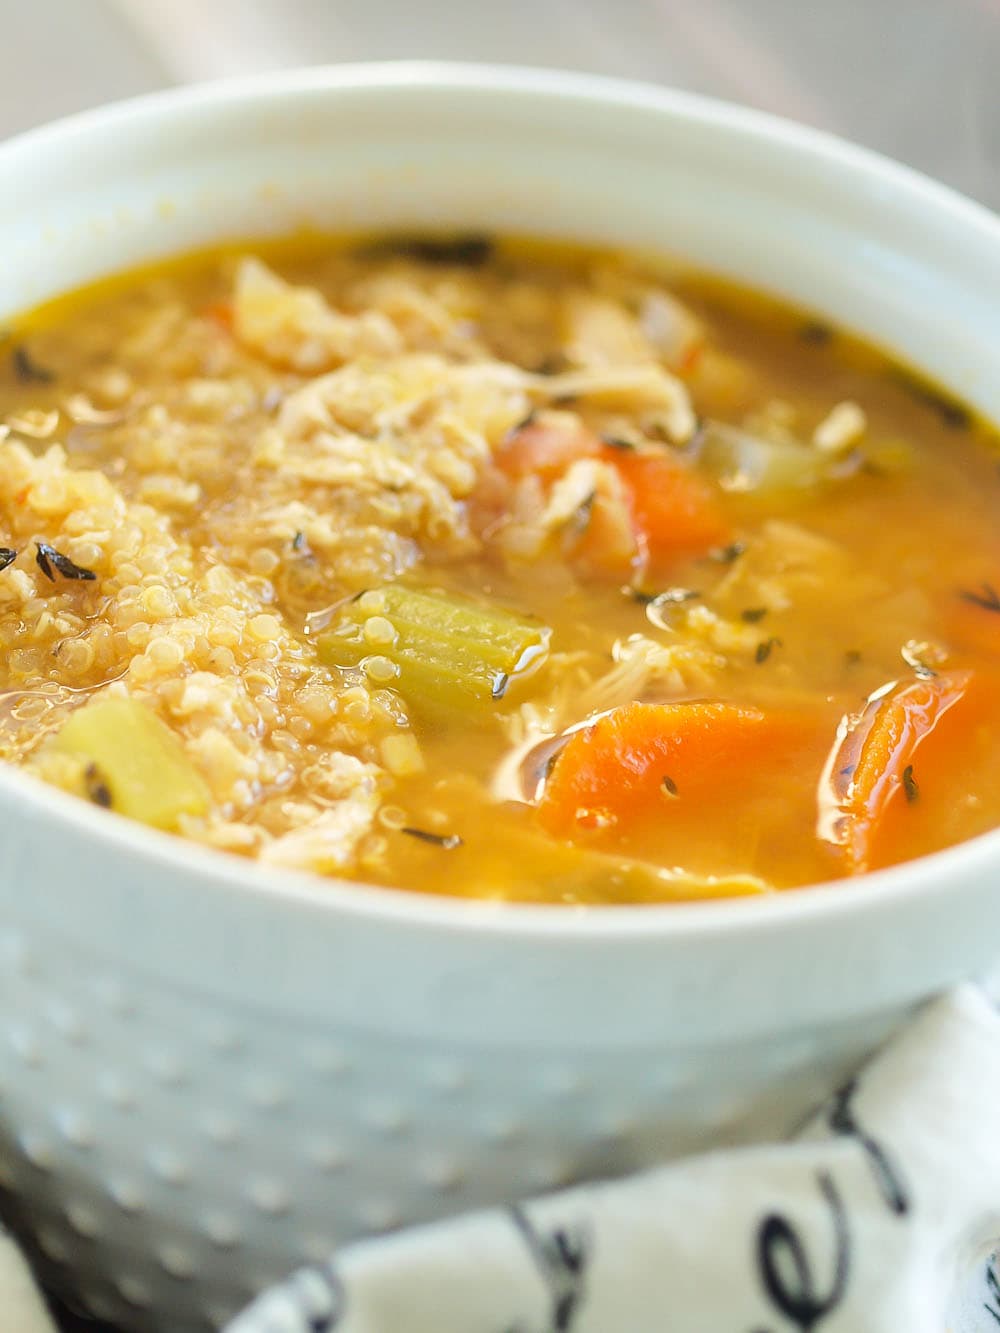 Chicken Quinoa Soup is an updated classic! All the flavor of chicken noodle soup but with healthy quinoa in place of the noodles! This is a fabulous recipe.